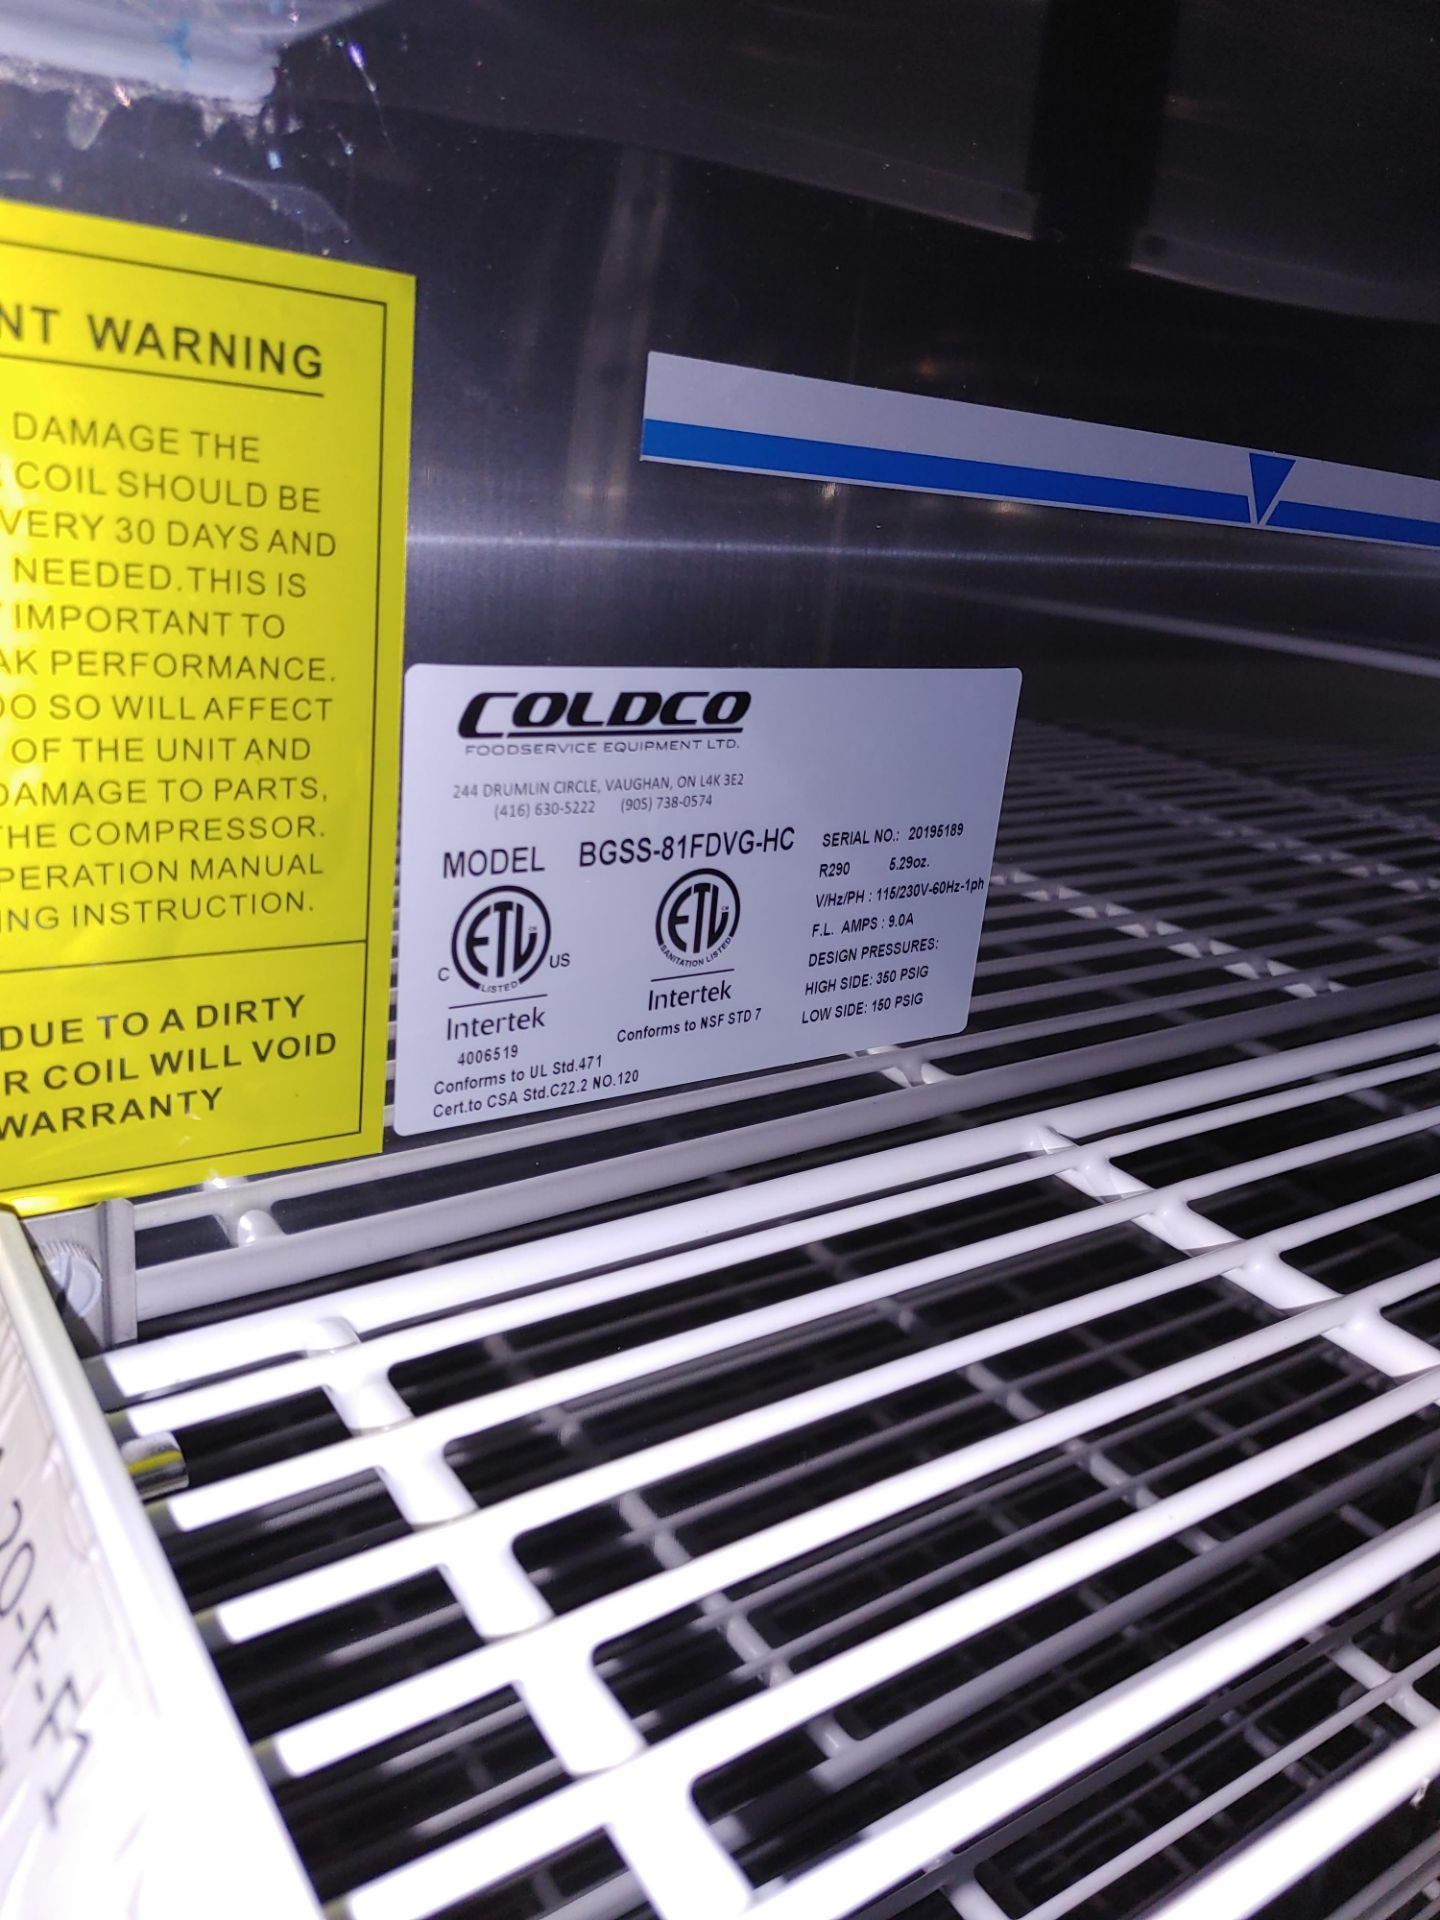 Coldco "BGSS-81FDVG-HC" 3 Door Glass Front Freezer Stainless Steel S/N 20195189 - Image 2 of 2